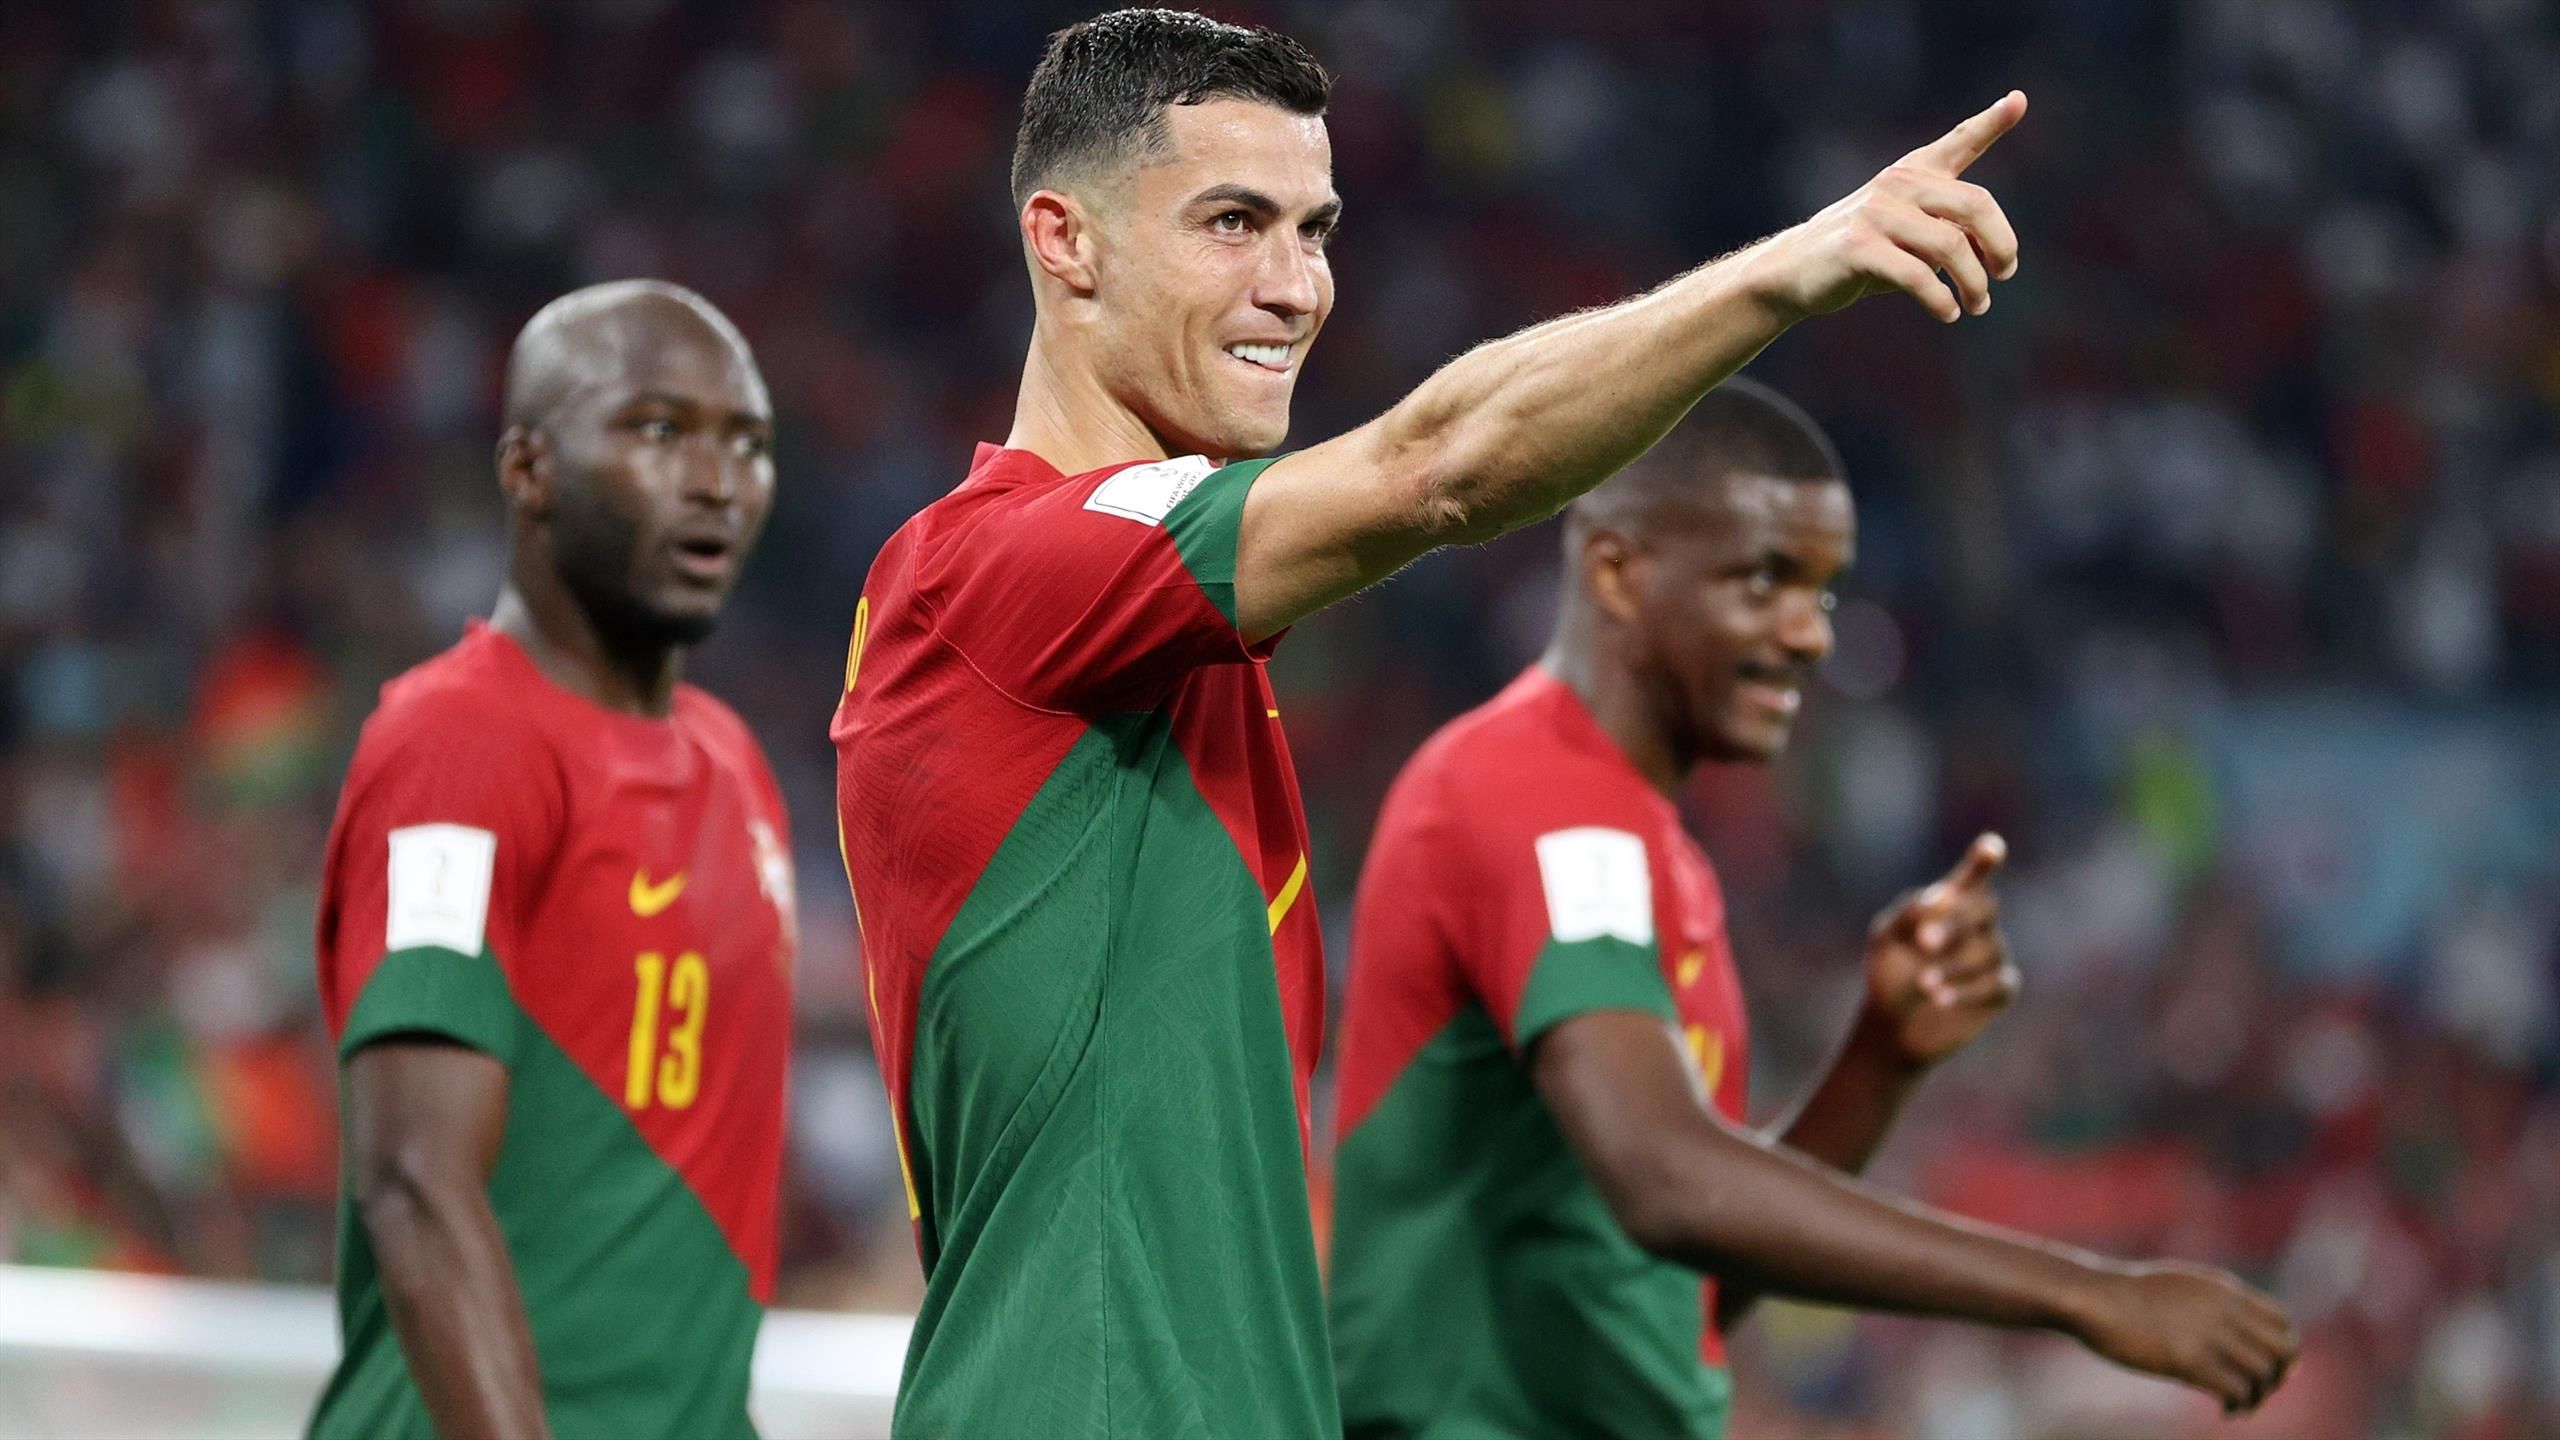 Little known before World Cup, Ramos goals lift Portugal